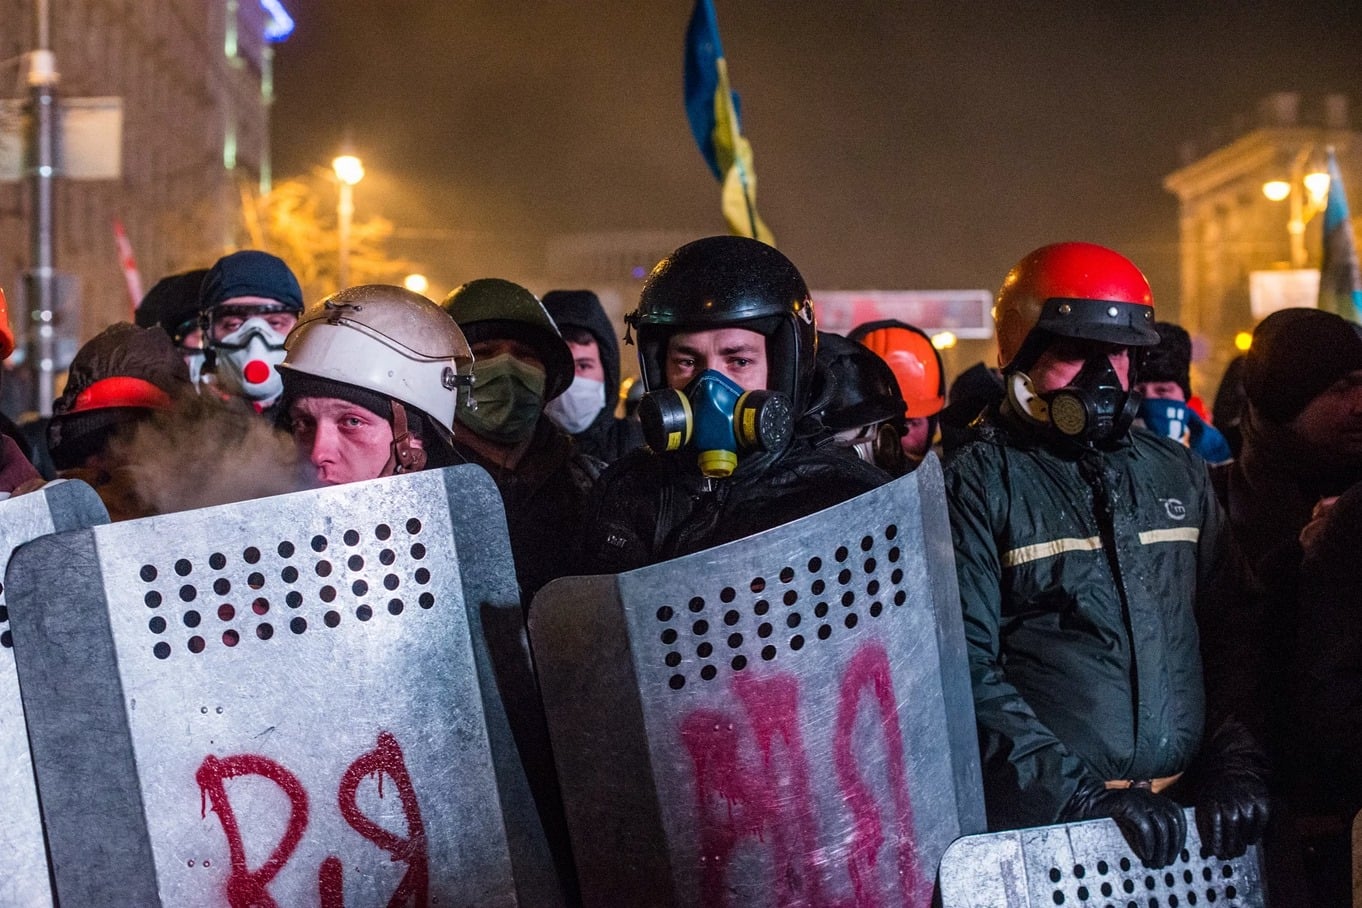 The power of volunteerism: providing protective gear for protesters during Euromaidan    ~~